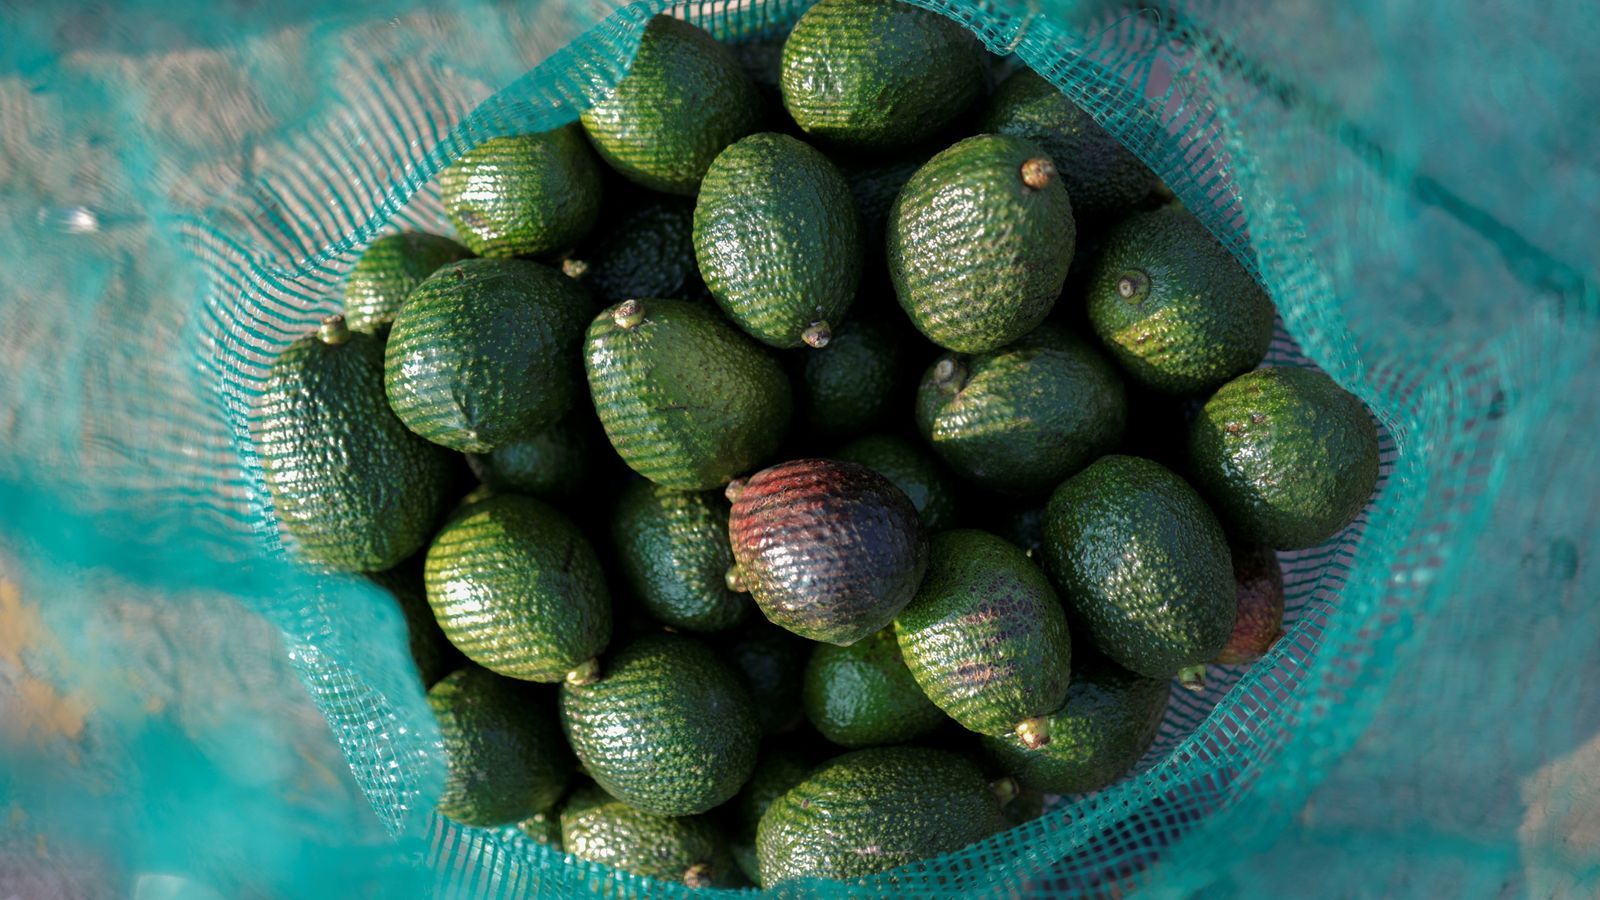 Armed highway thieves steal 40 tonnes of avocados in Mexico